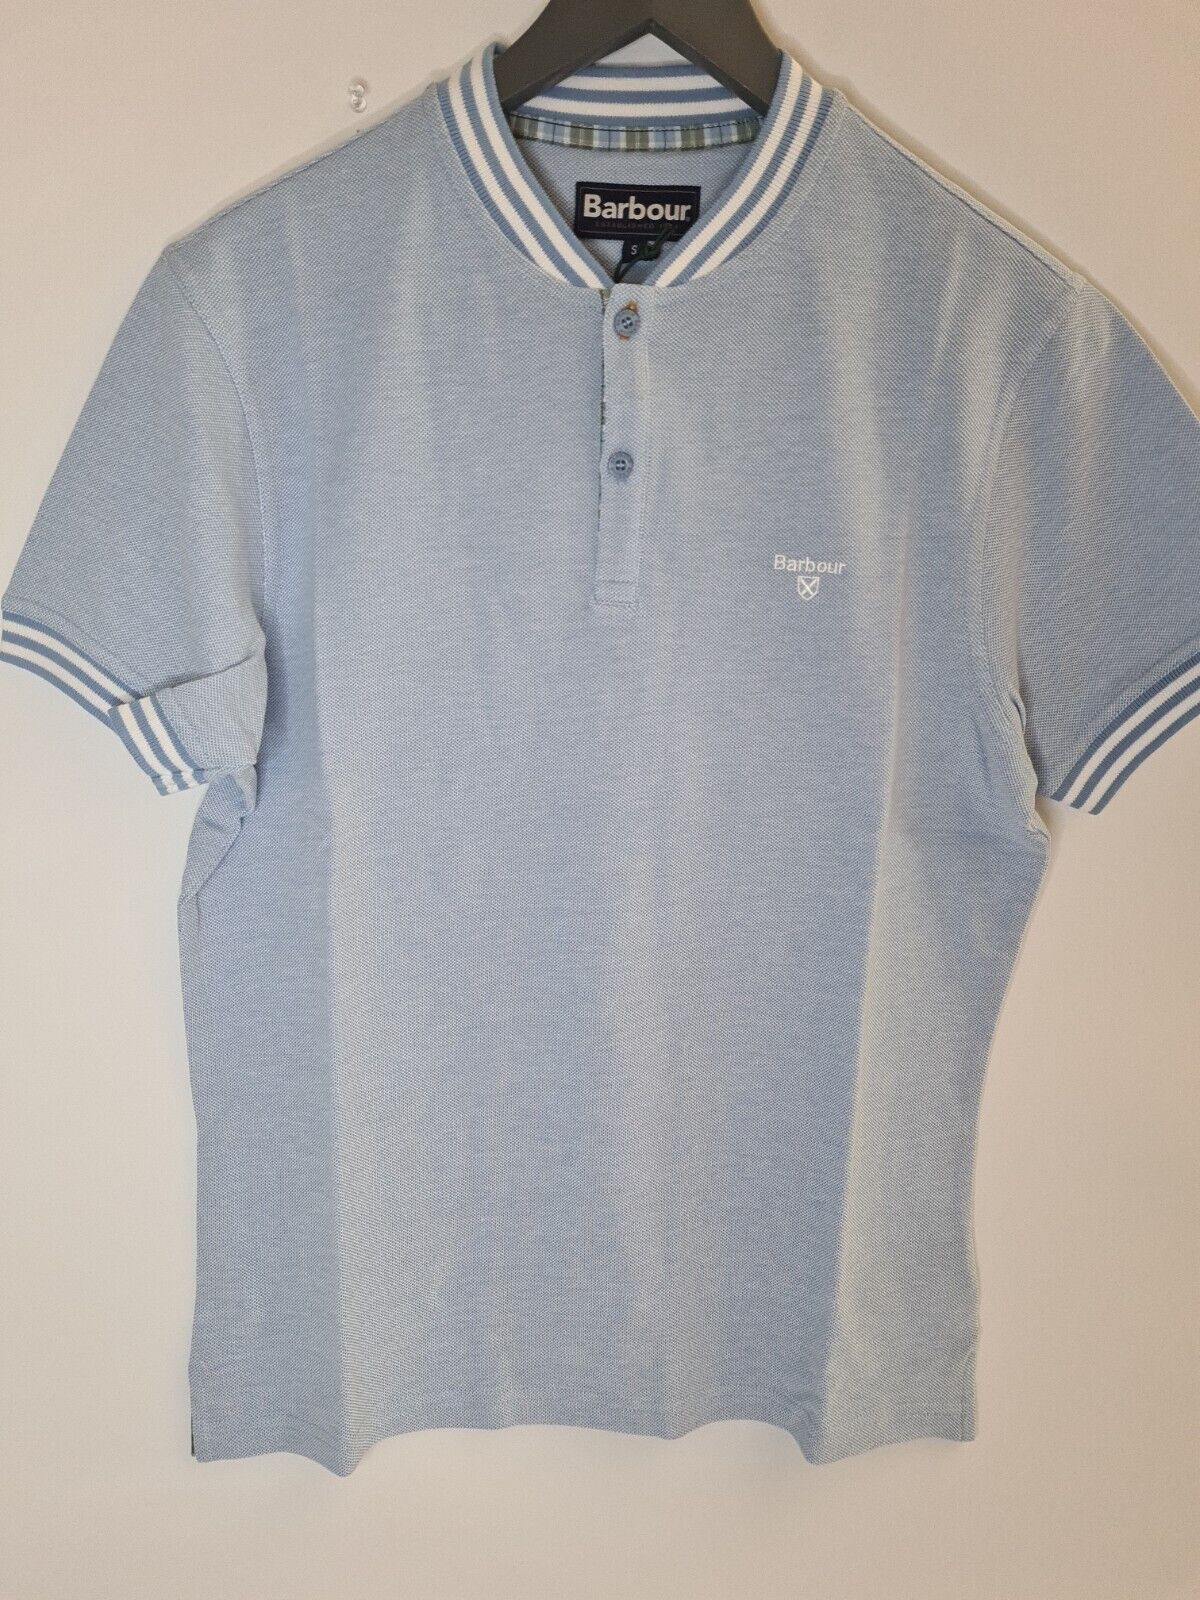 Barbour Hawick Short Sleeved Blue Polo Shirt Blue Size Small **** V26